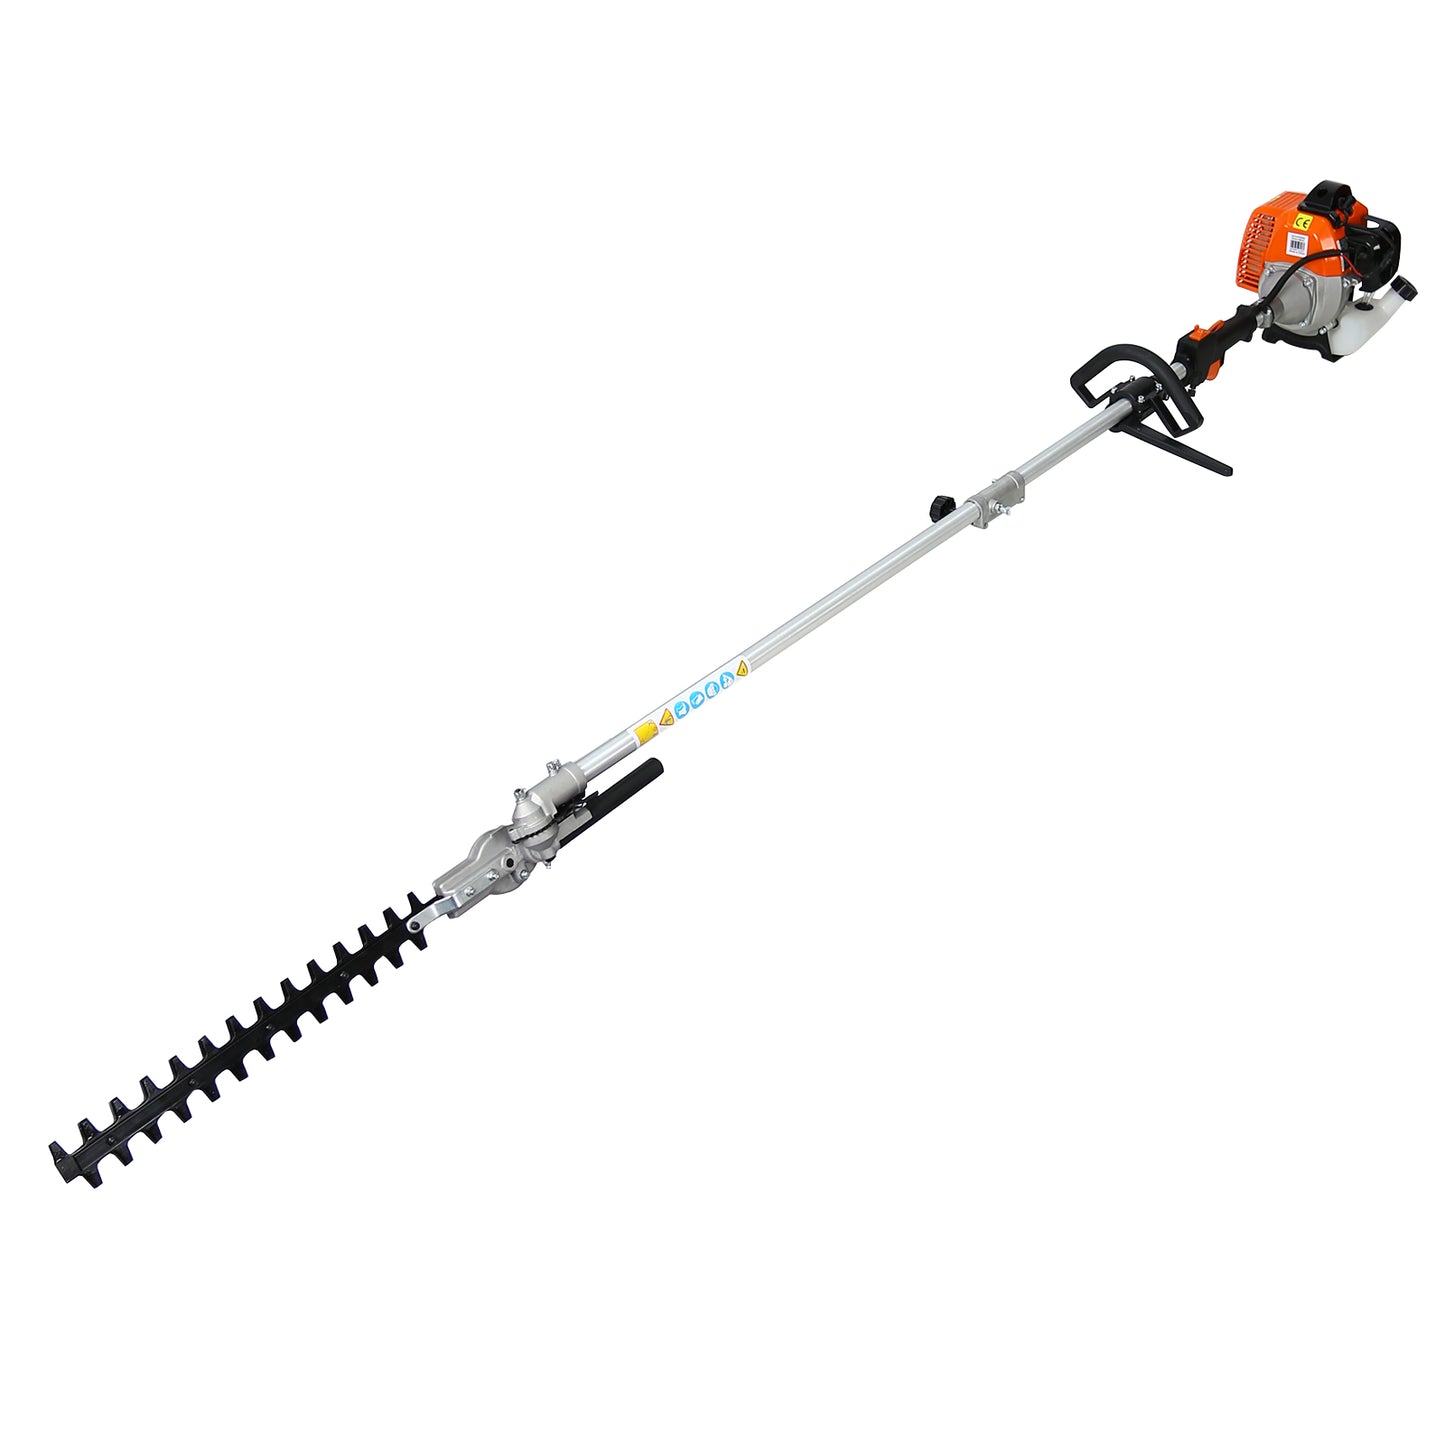 Grass Trimmer Weed Eater, 4 in 1 Gas Powered 2-Cycle String Trimmer with Gas Pole Saw, Hedge Trimmer, Grass Trimmer, and Brush Cutter for Outdoor Home Commercial